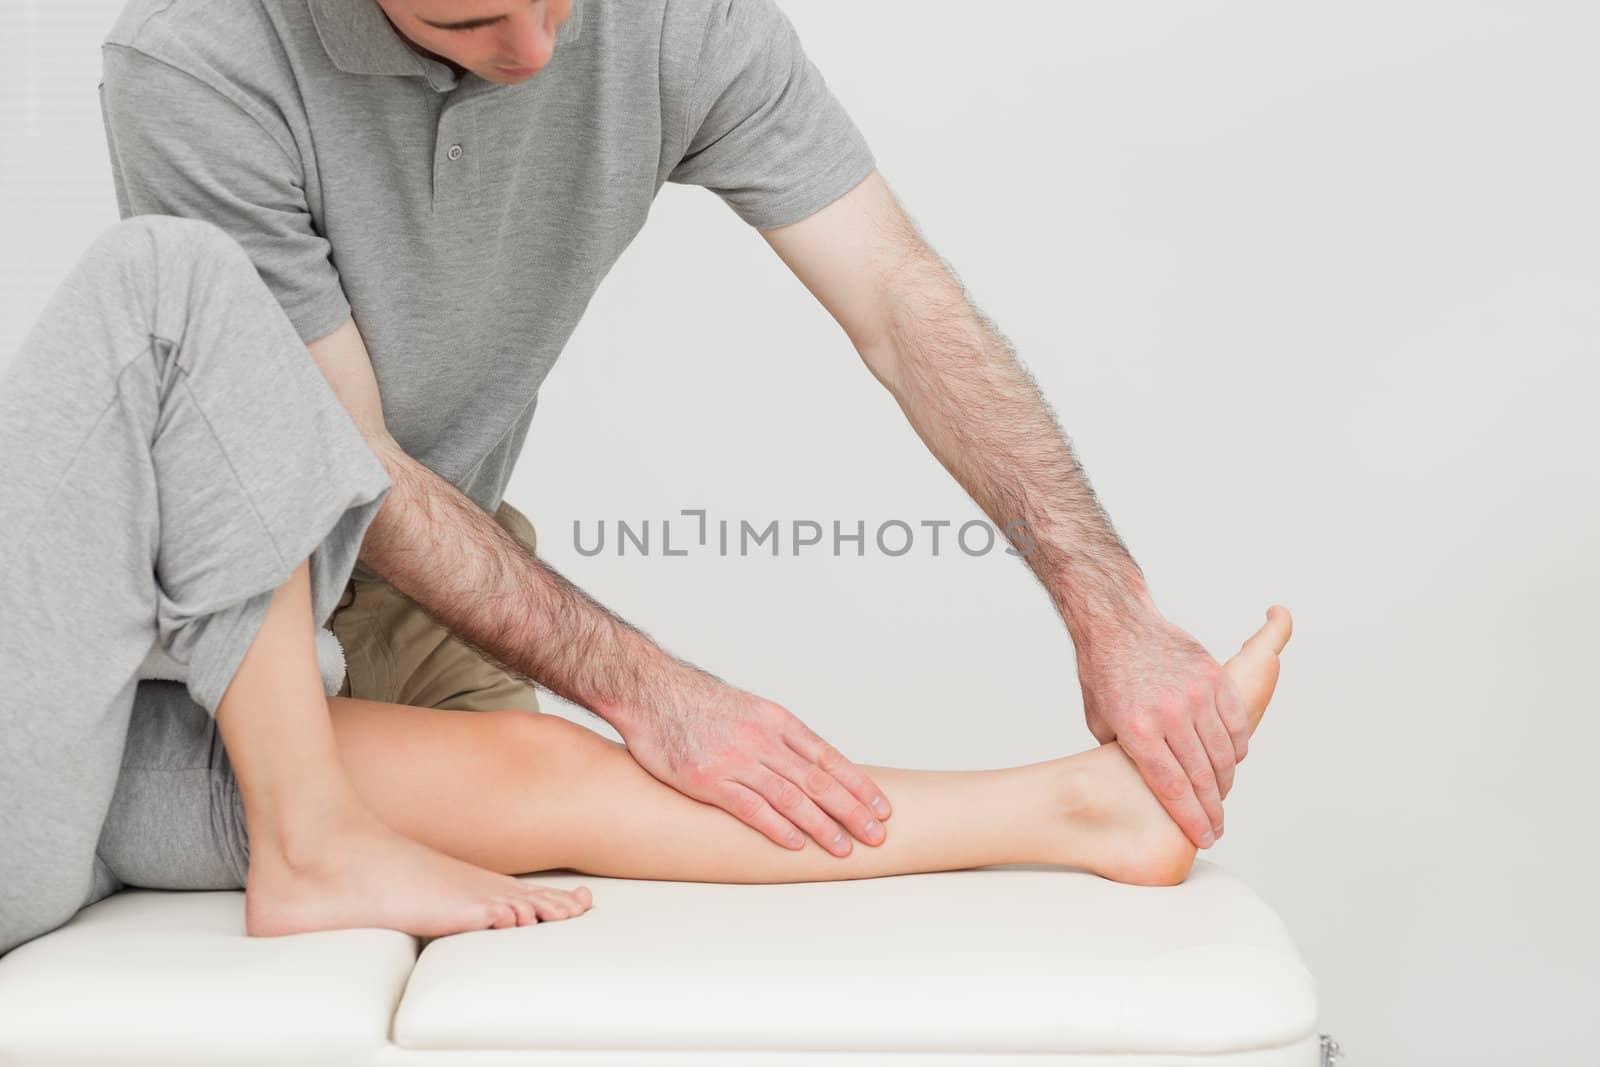 Calf of a patient being stretched by a doctor in a room